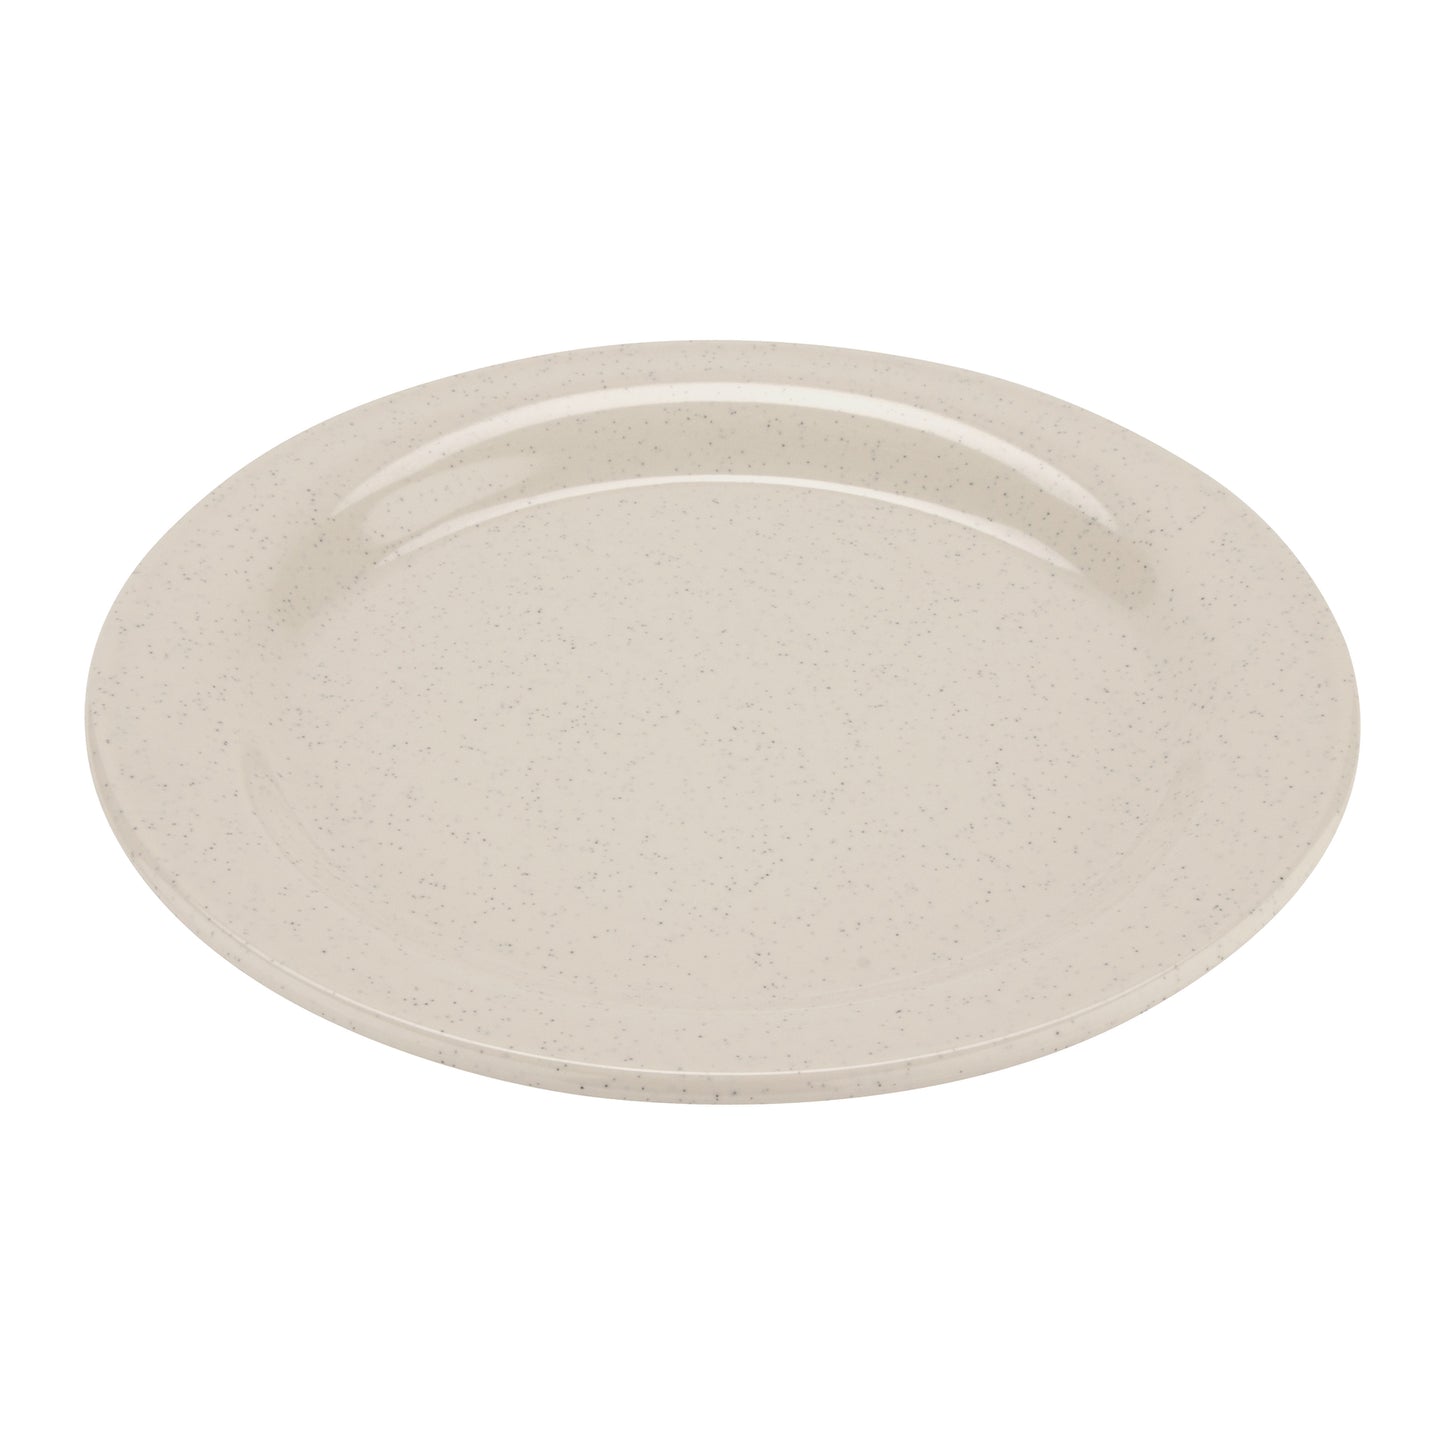 7.5" Round Plate (12 Pack)